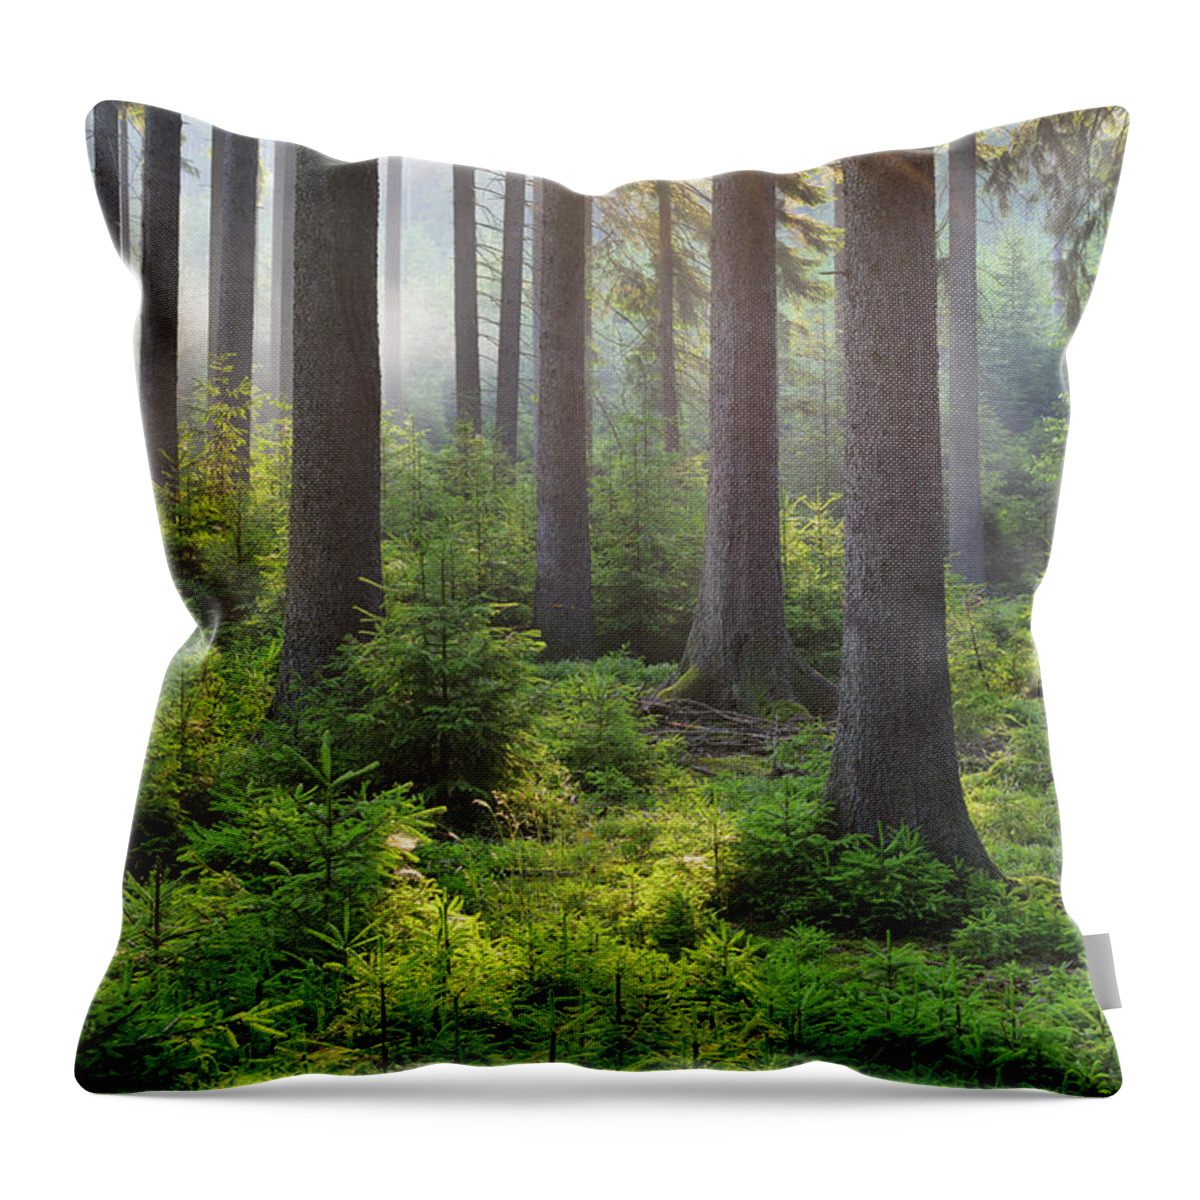 Scenics Throw Pillow featuring the photograph Coniferous Forest In The Morning by Raimund Linke